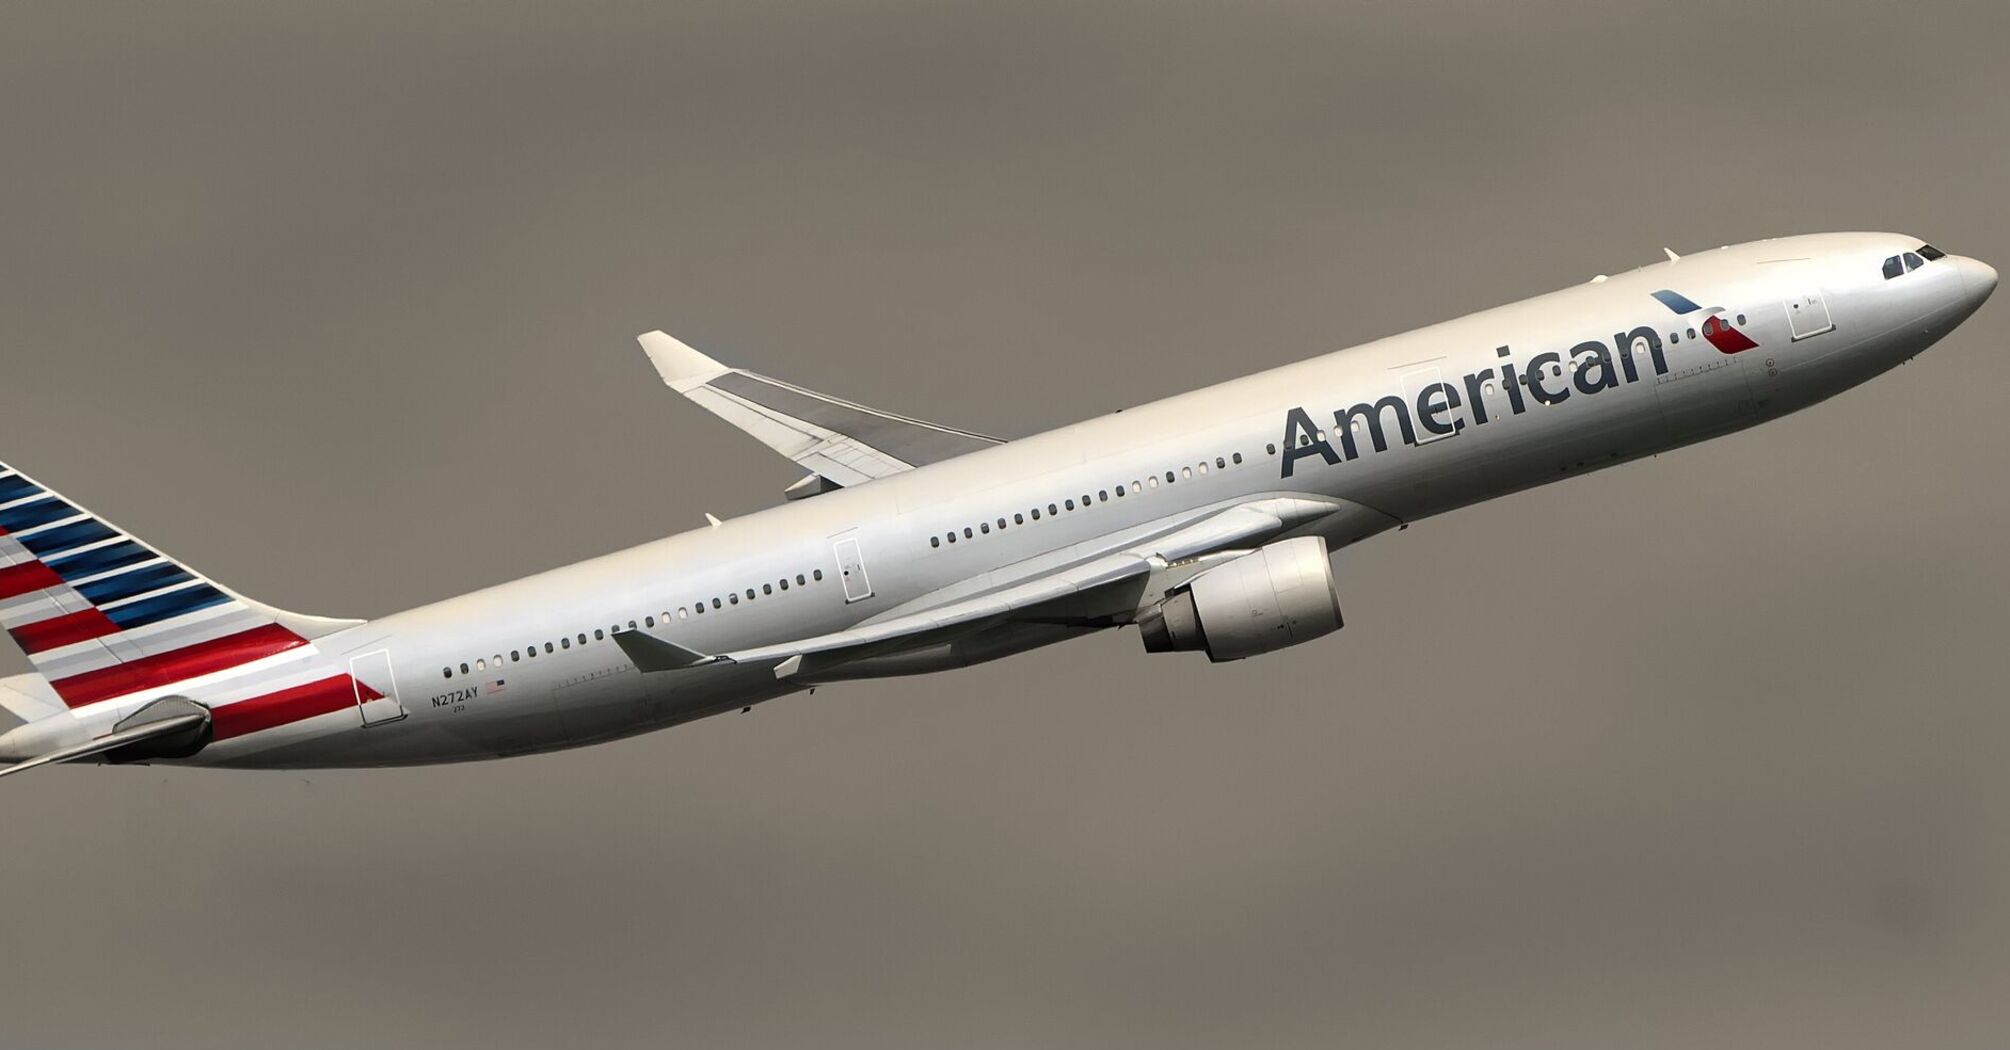 American Airlines Boeing 777 in flight, displaying the company's livery with the American flag on the tail 